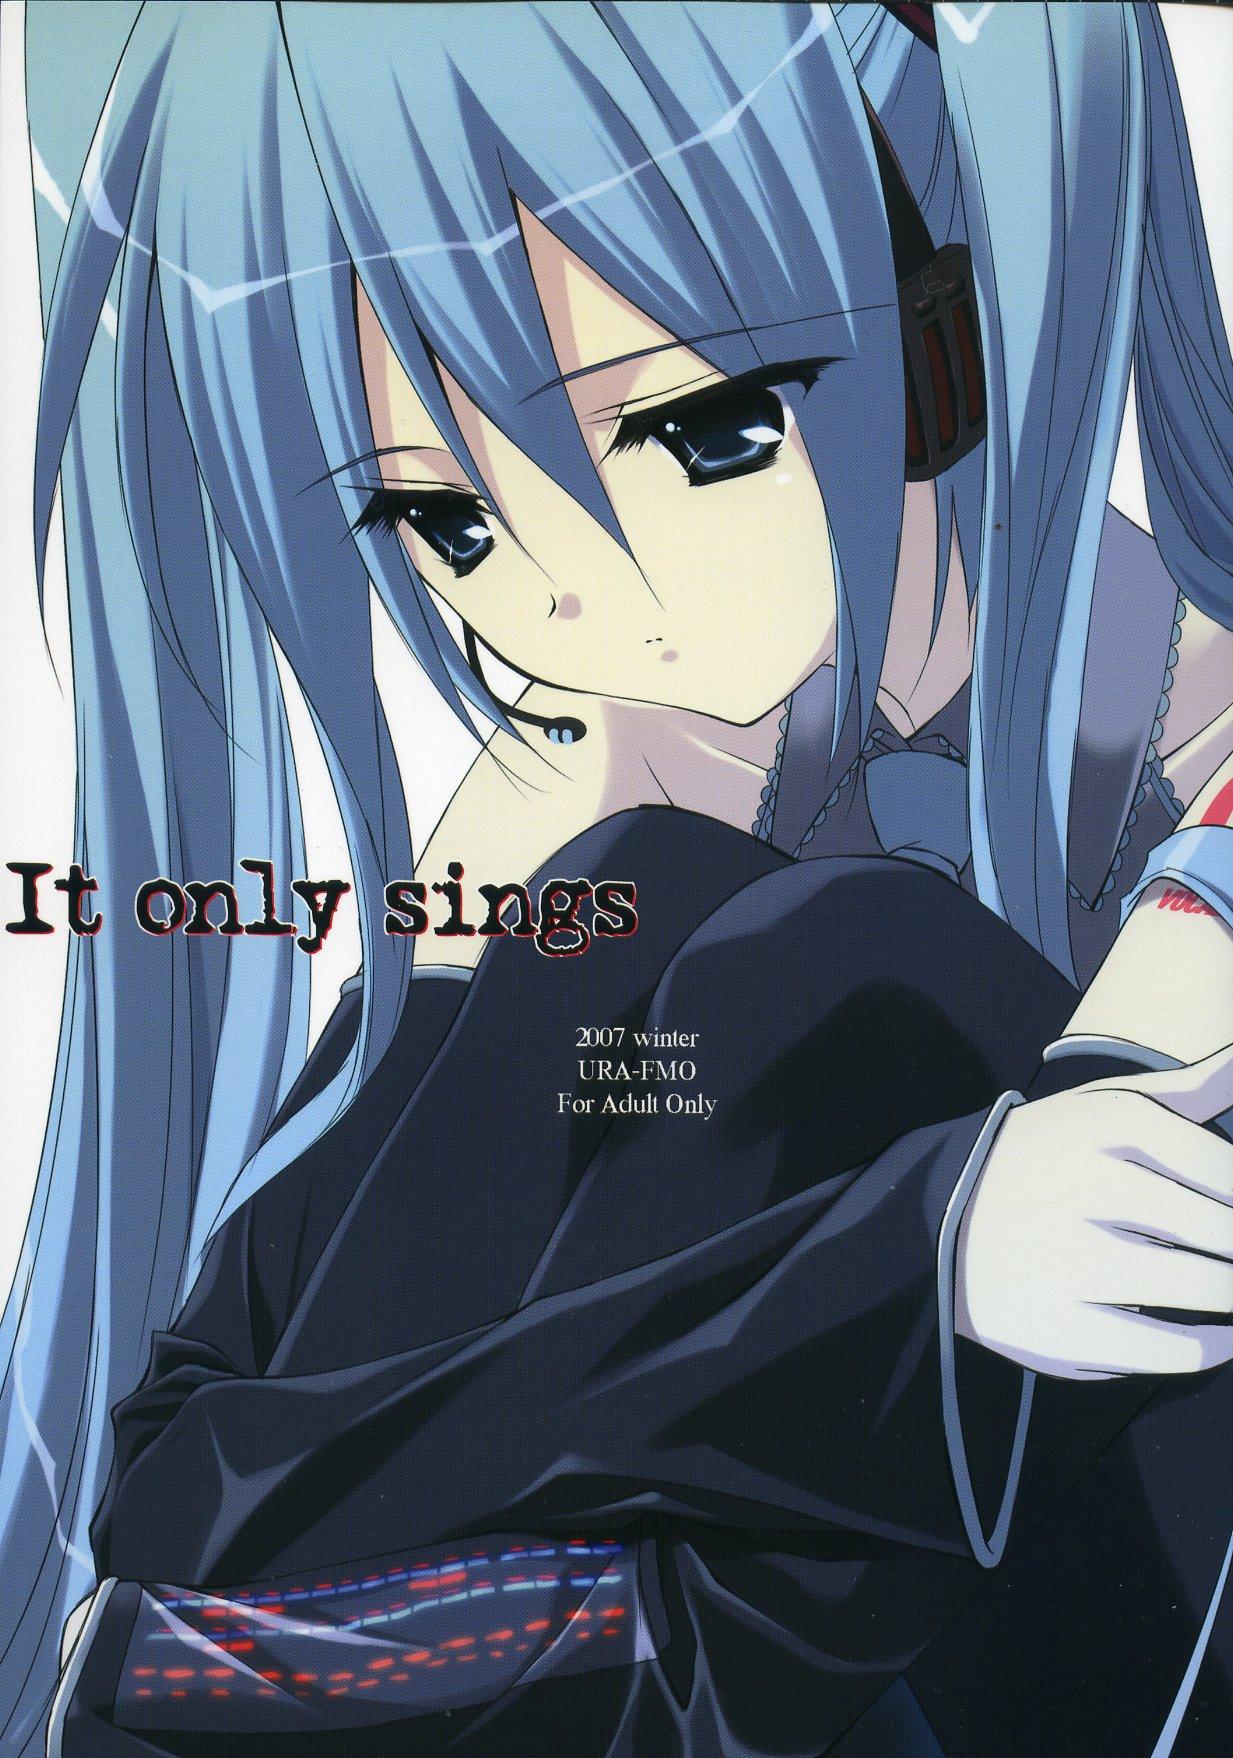 Dicks It only sings - Vocaloid Food - Picture 1